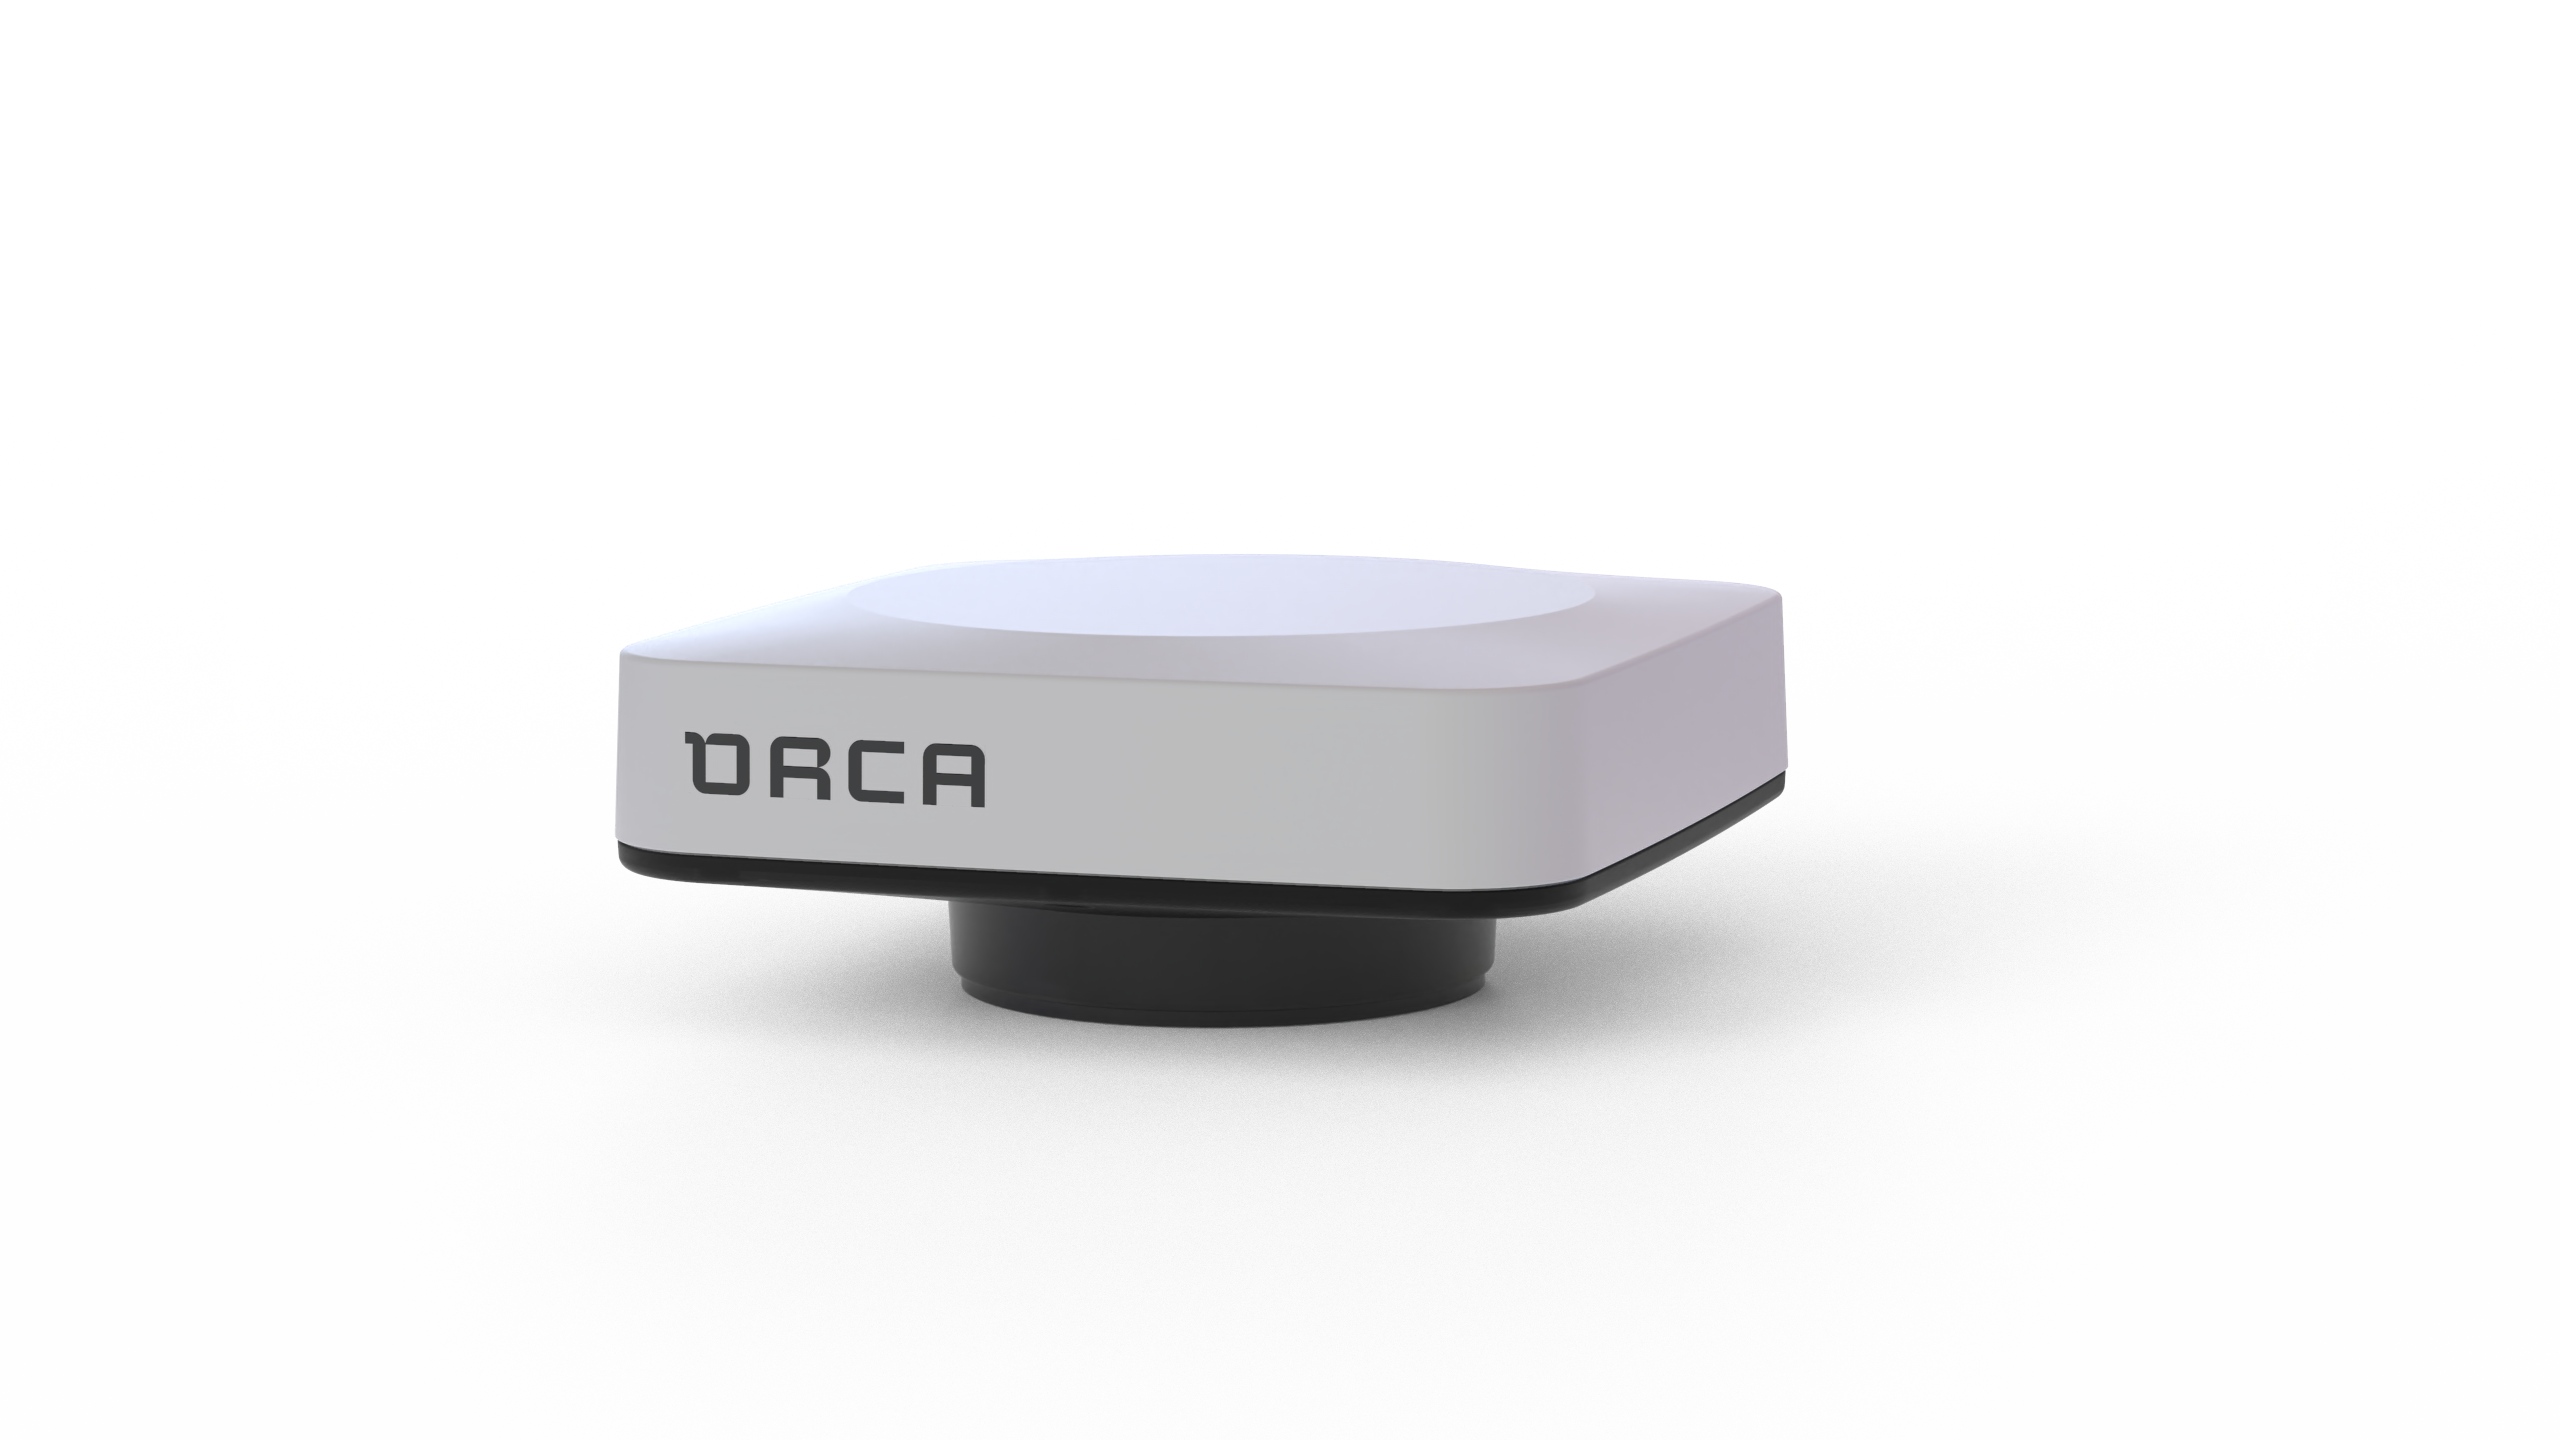 Orca Core powers advanced features in Orca.